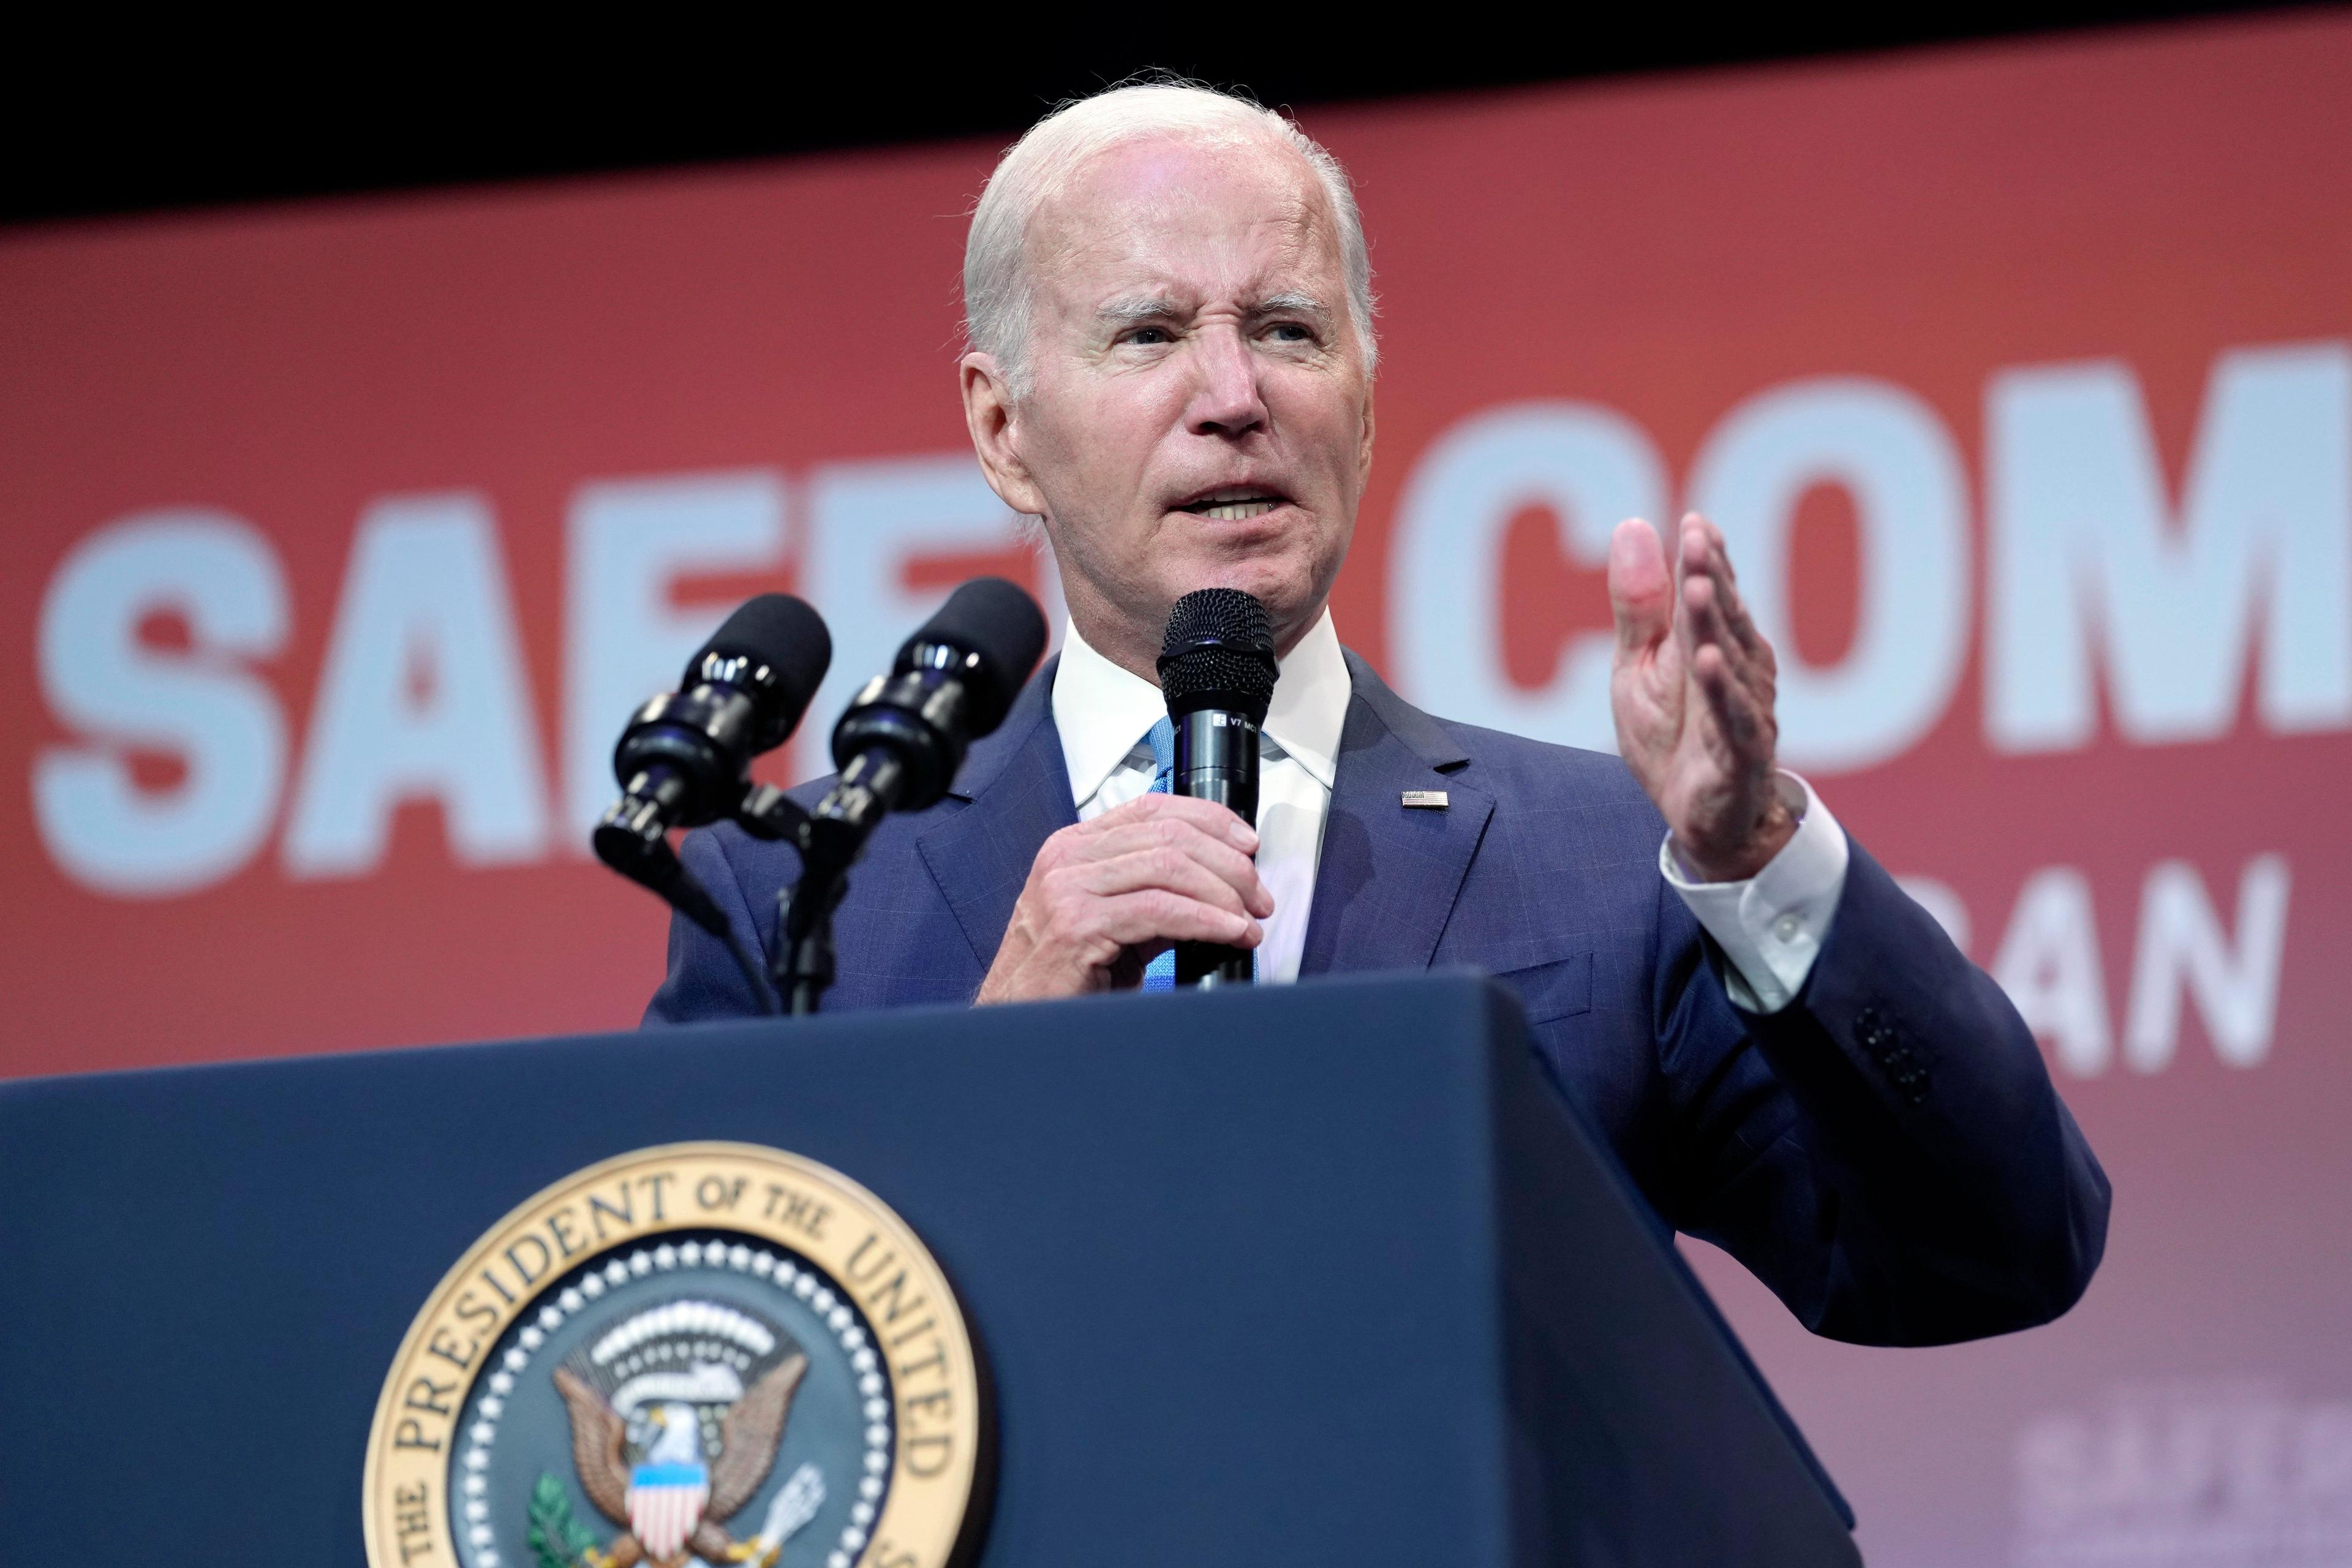 Biden refused to participate in the US presidential election